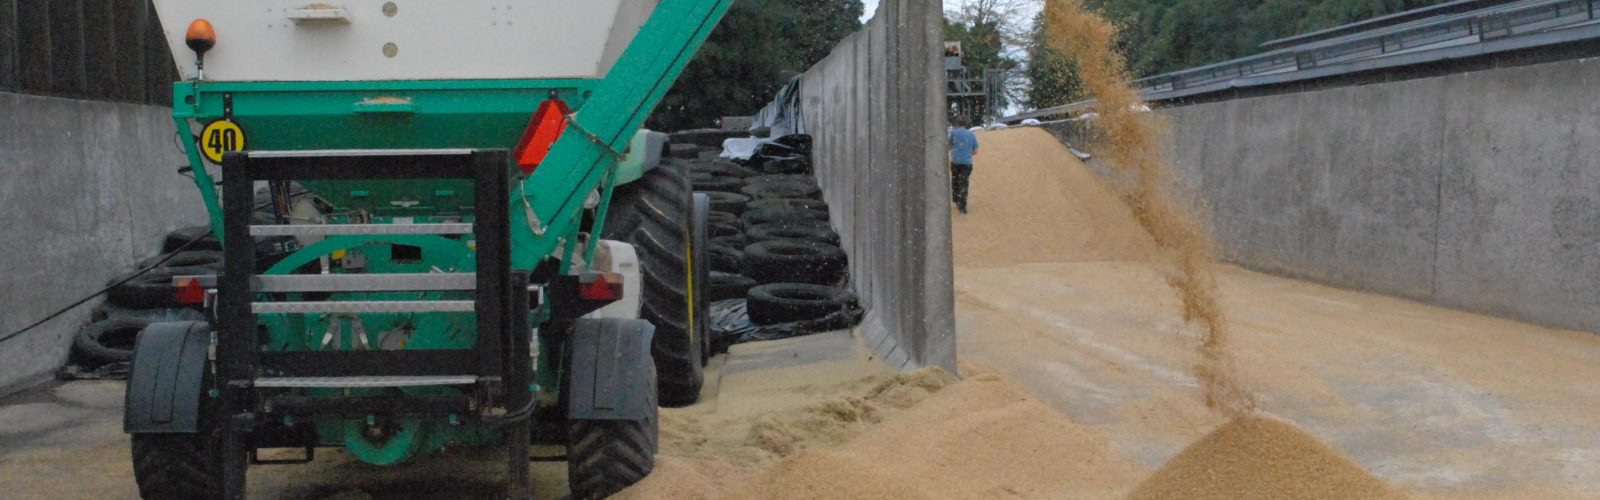 Using Crimp Grain to help offset rising feed costs